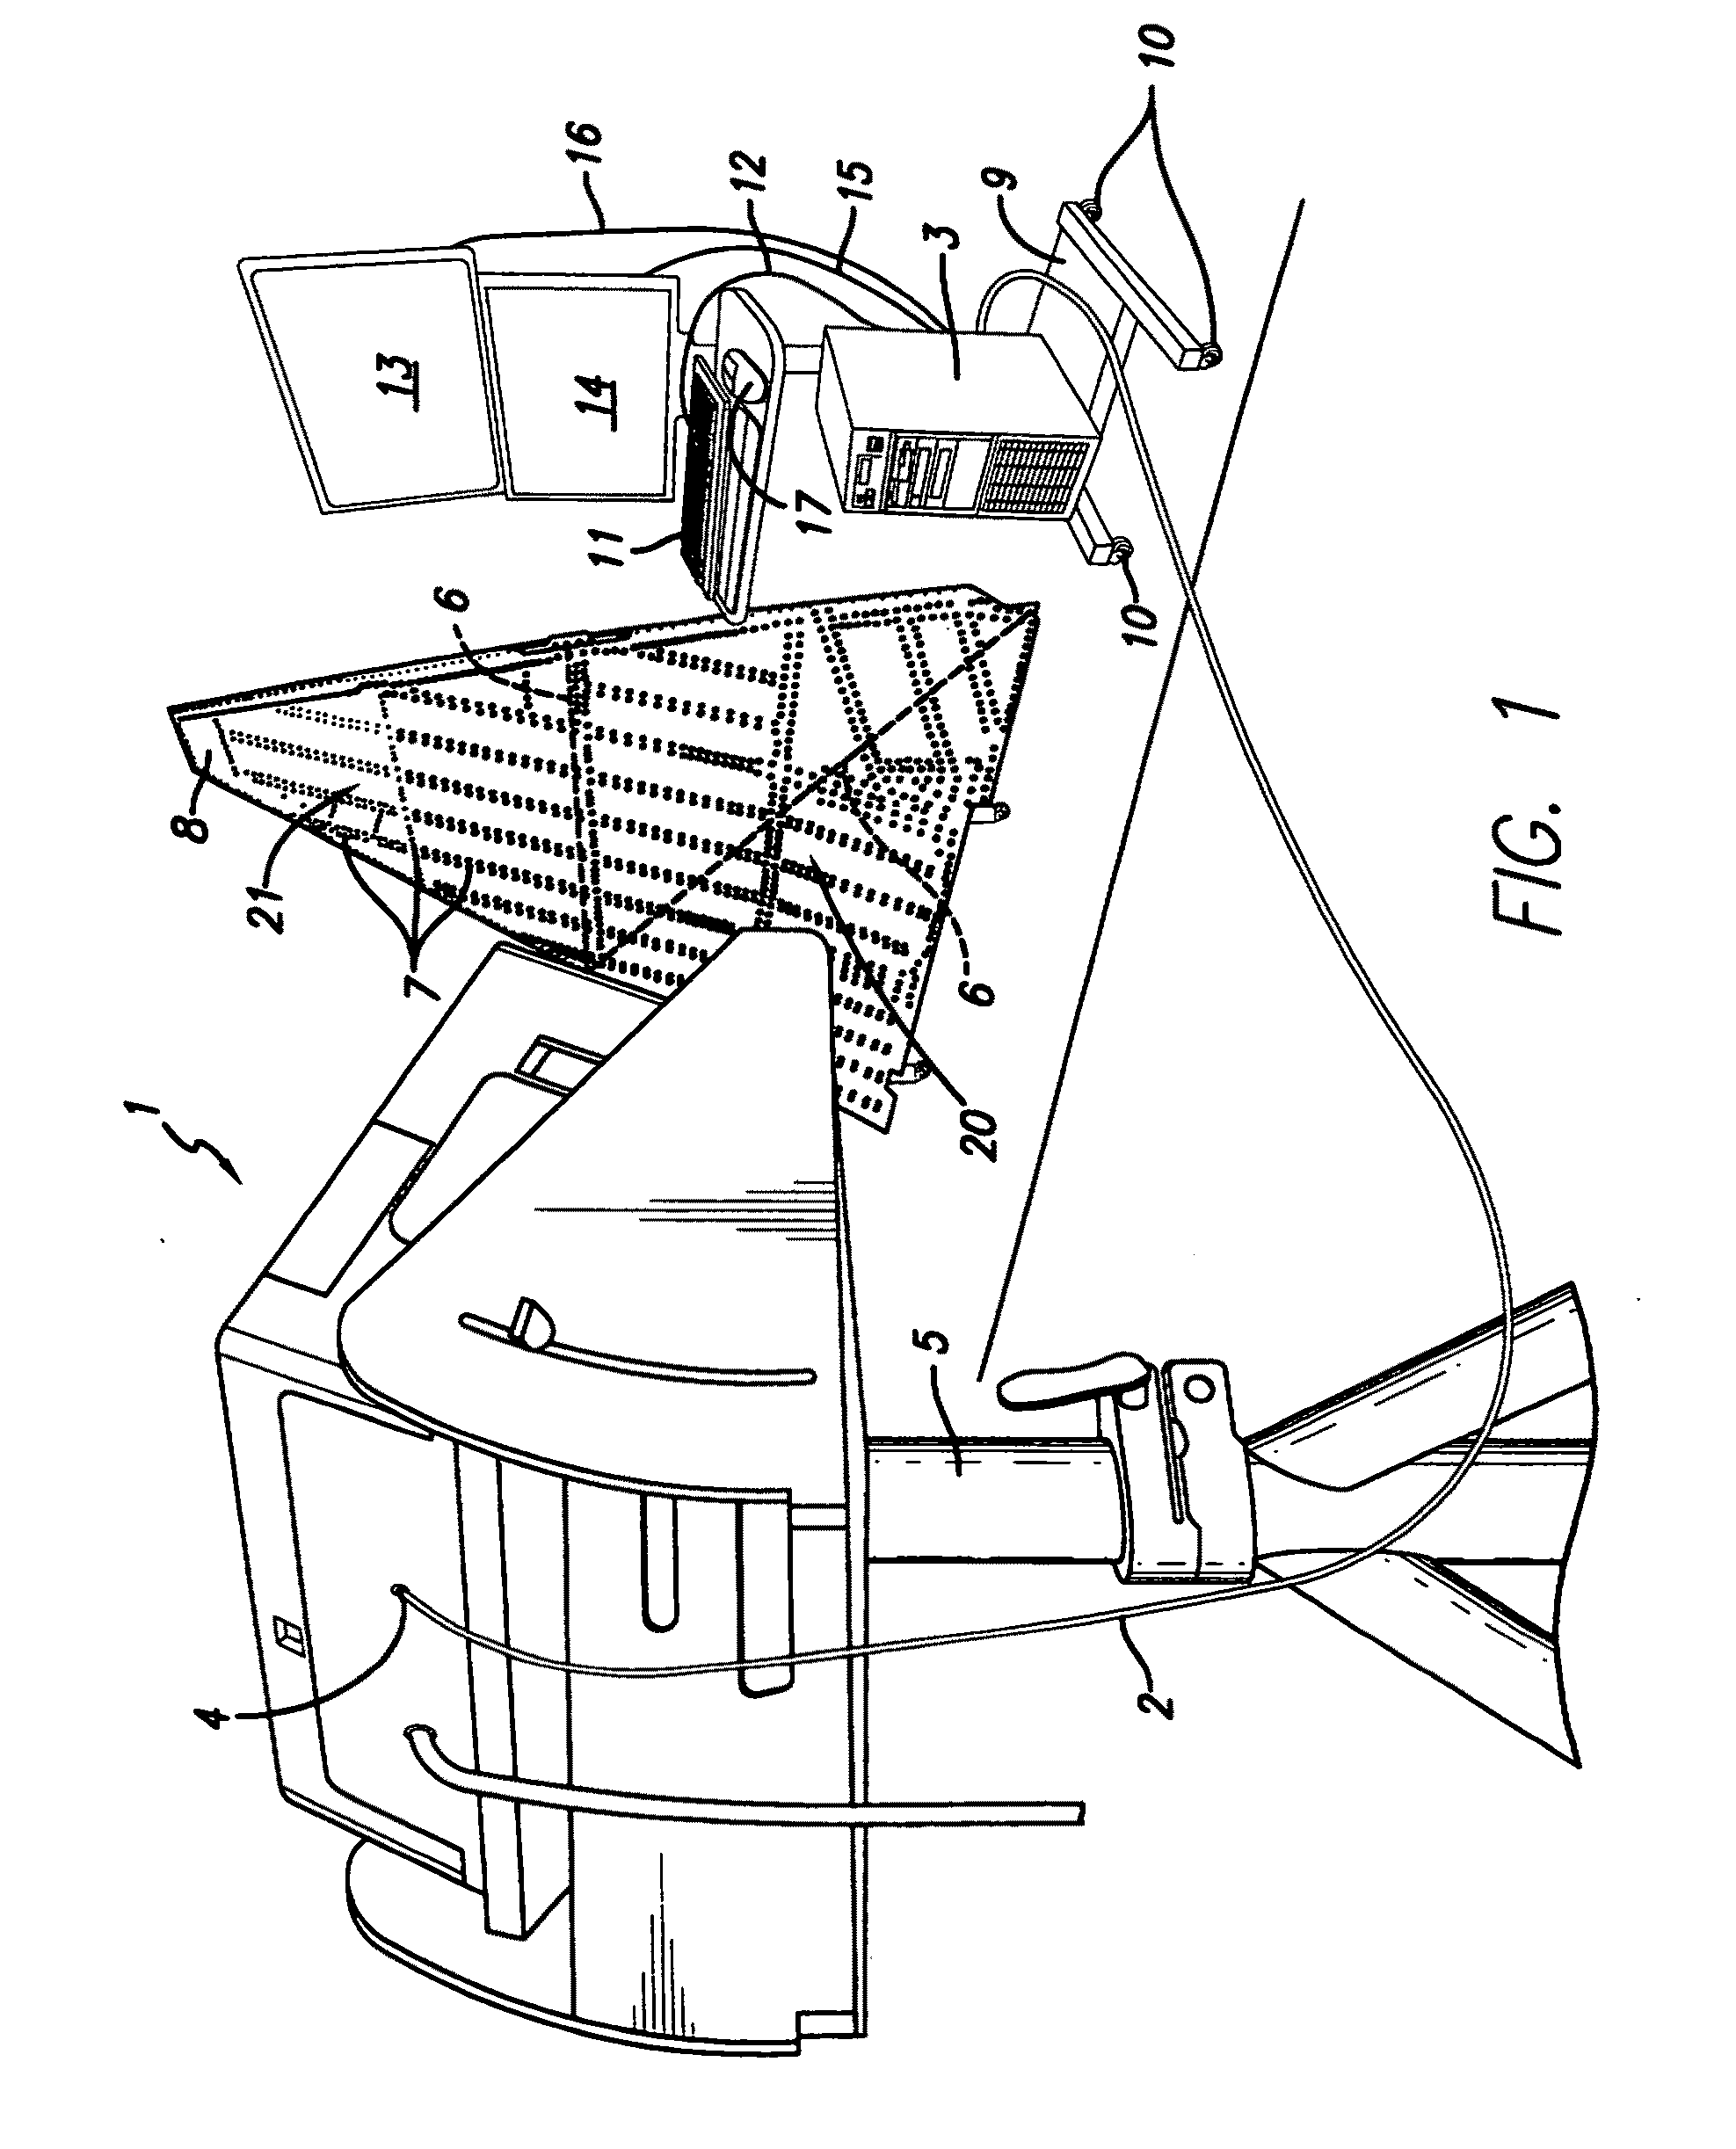 Systems and methods for optically projecting three-dimensional text, images and/or symbols onto three-dimensional objects